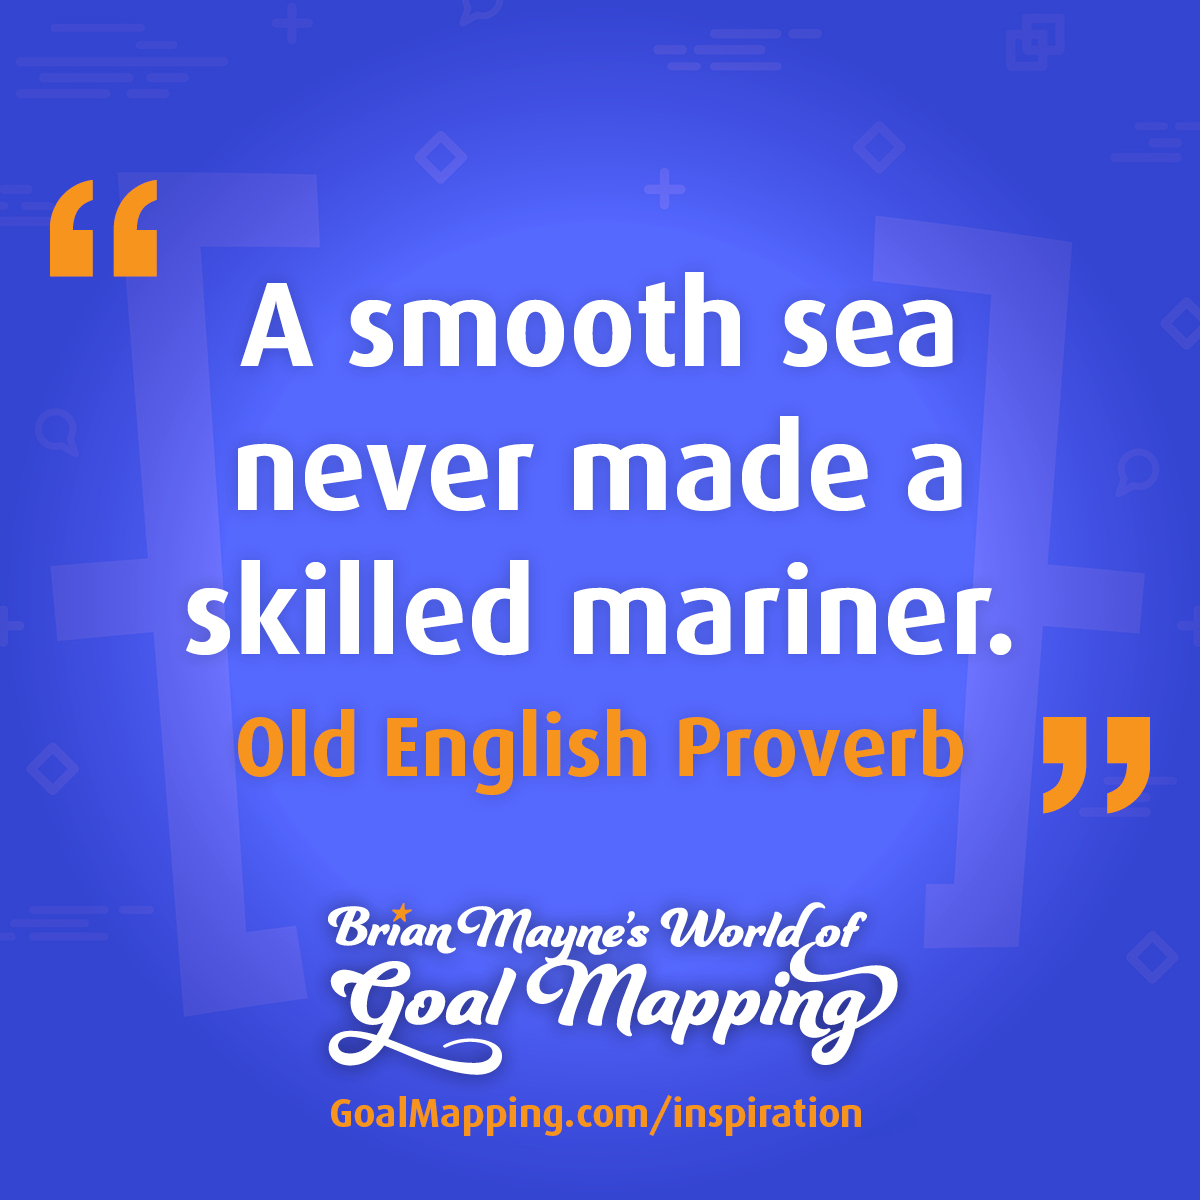 "A smooth sea never made a skilled mariner." Old English Proverb